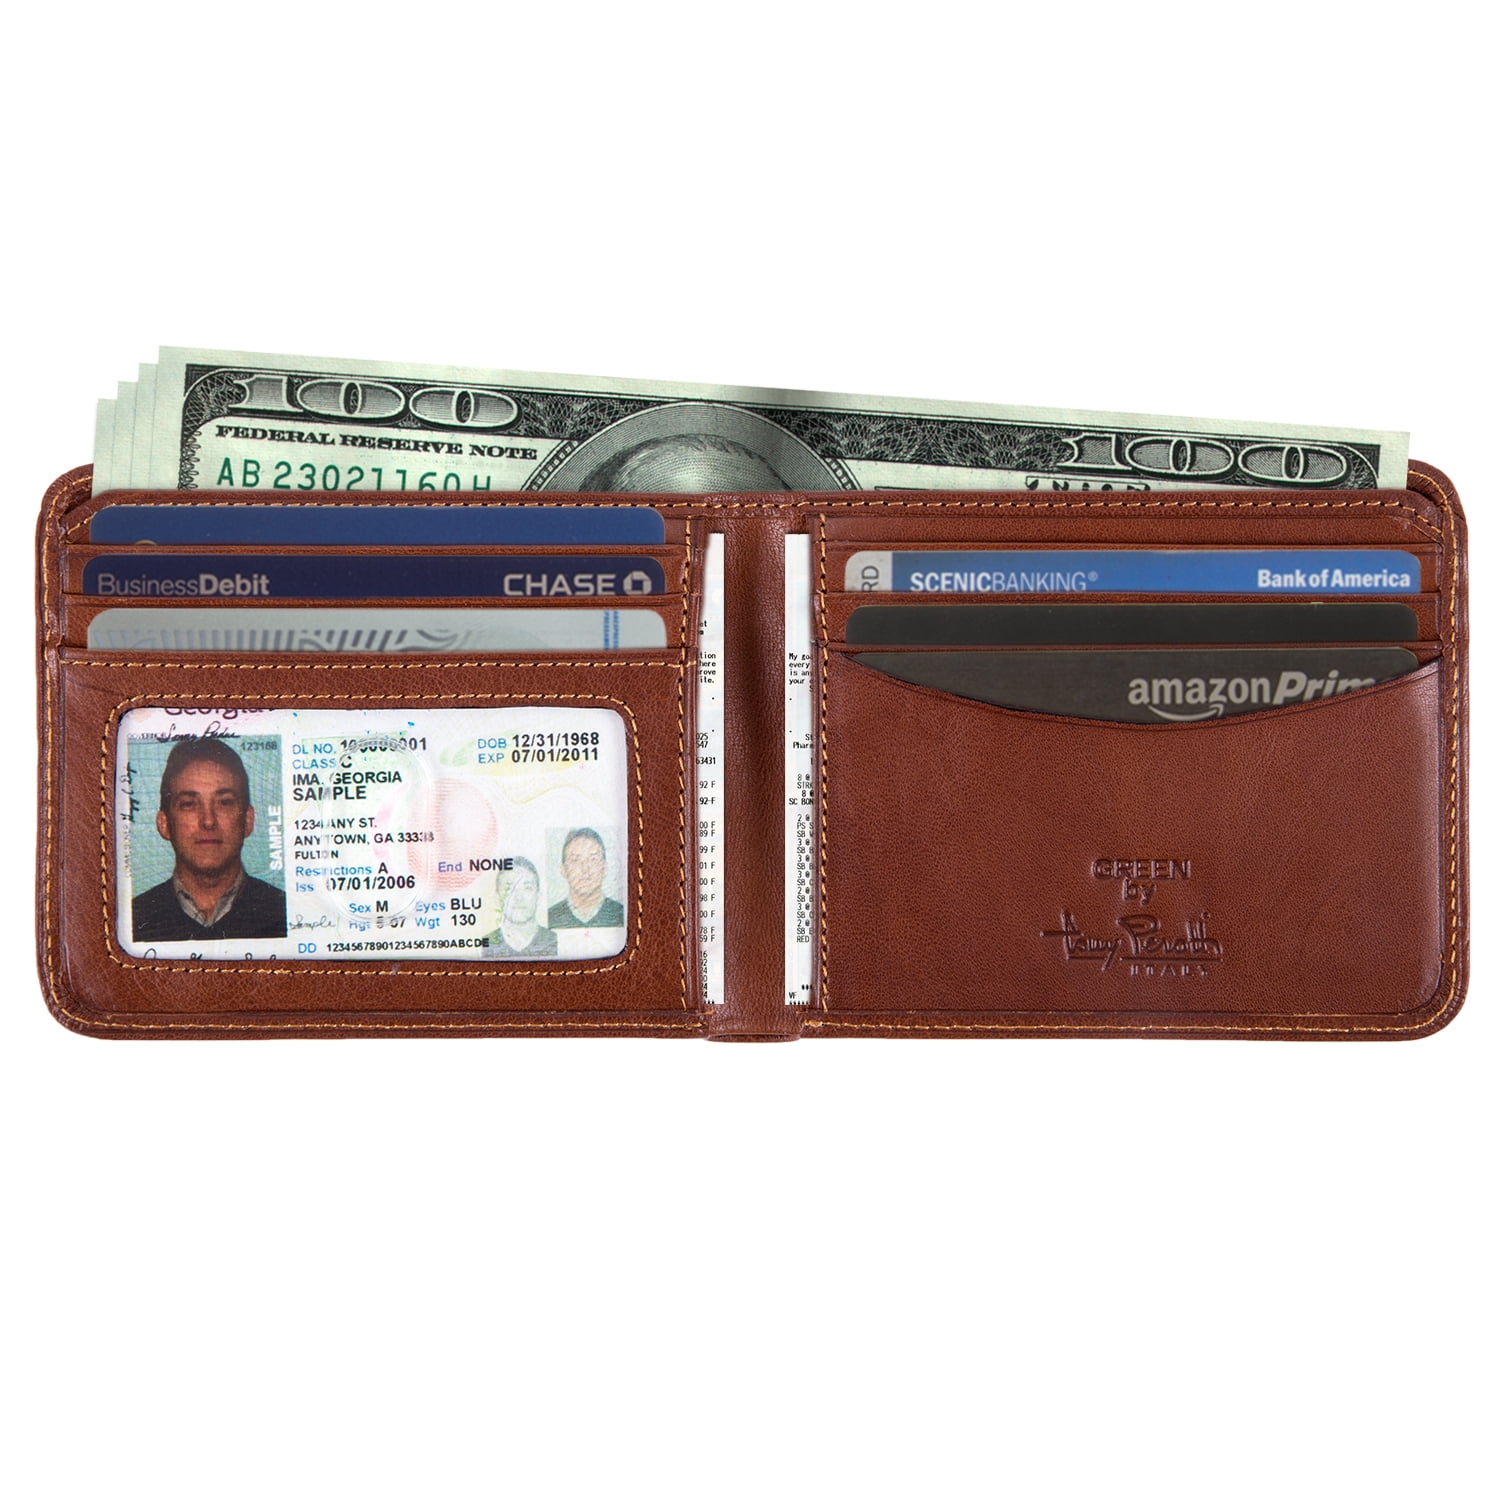 Mens Leather Bifold Hipster Wallet Large with ID Window Multi Business and Credit Card Holder Slots Made with Real Italian Cowhide Leather by Tony Perotti 